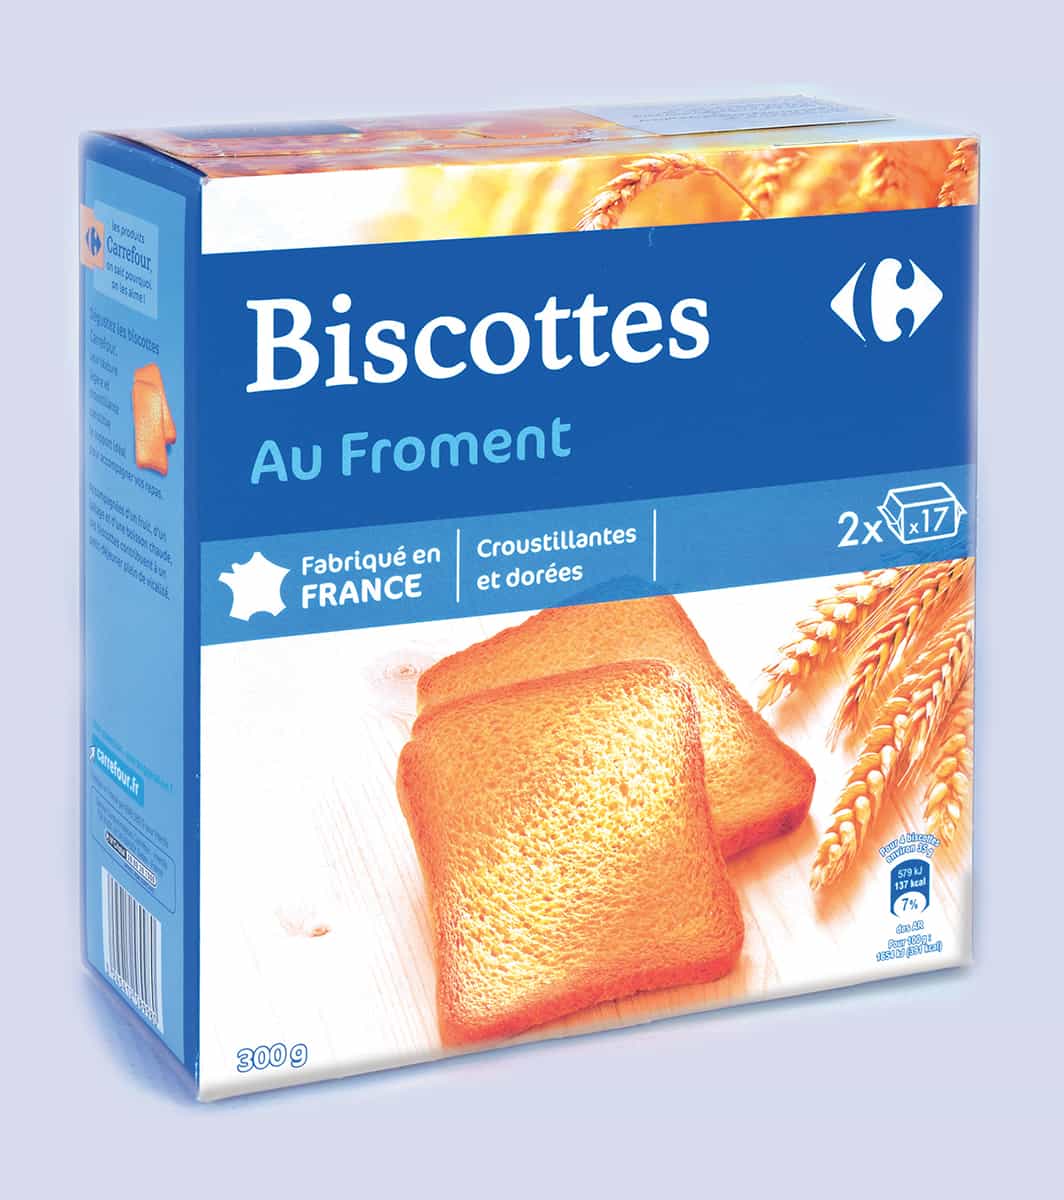 https://carrefourmaroc.ma/wp-content/uploads/2020/08/Biscottes-normales-300g.jpg